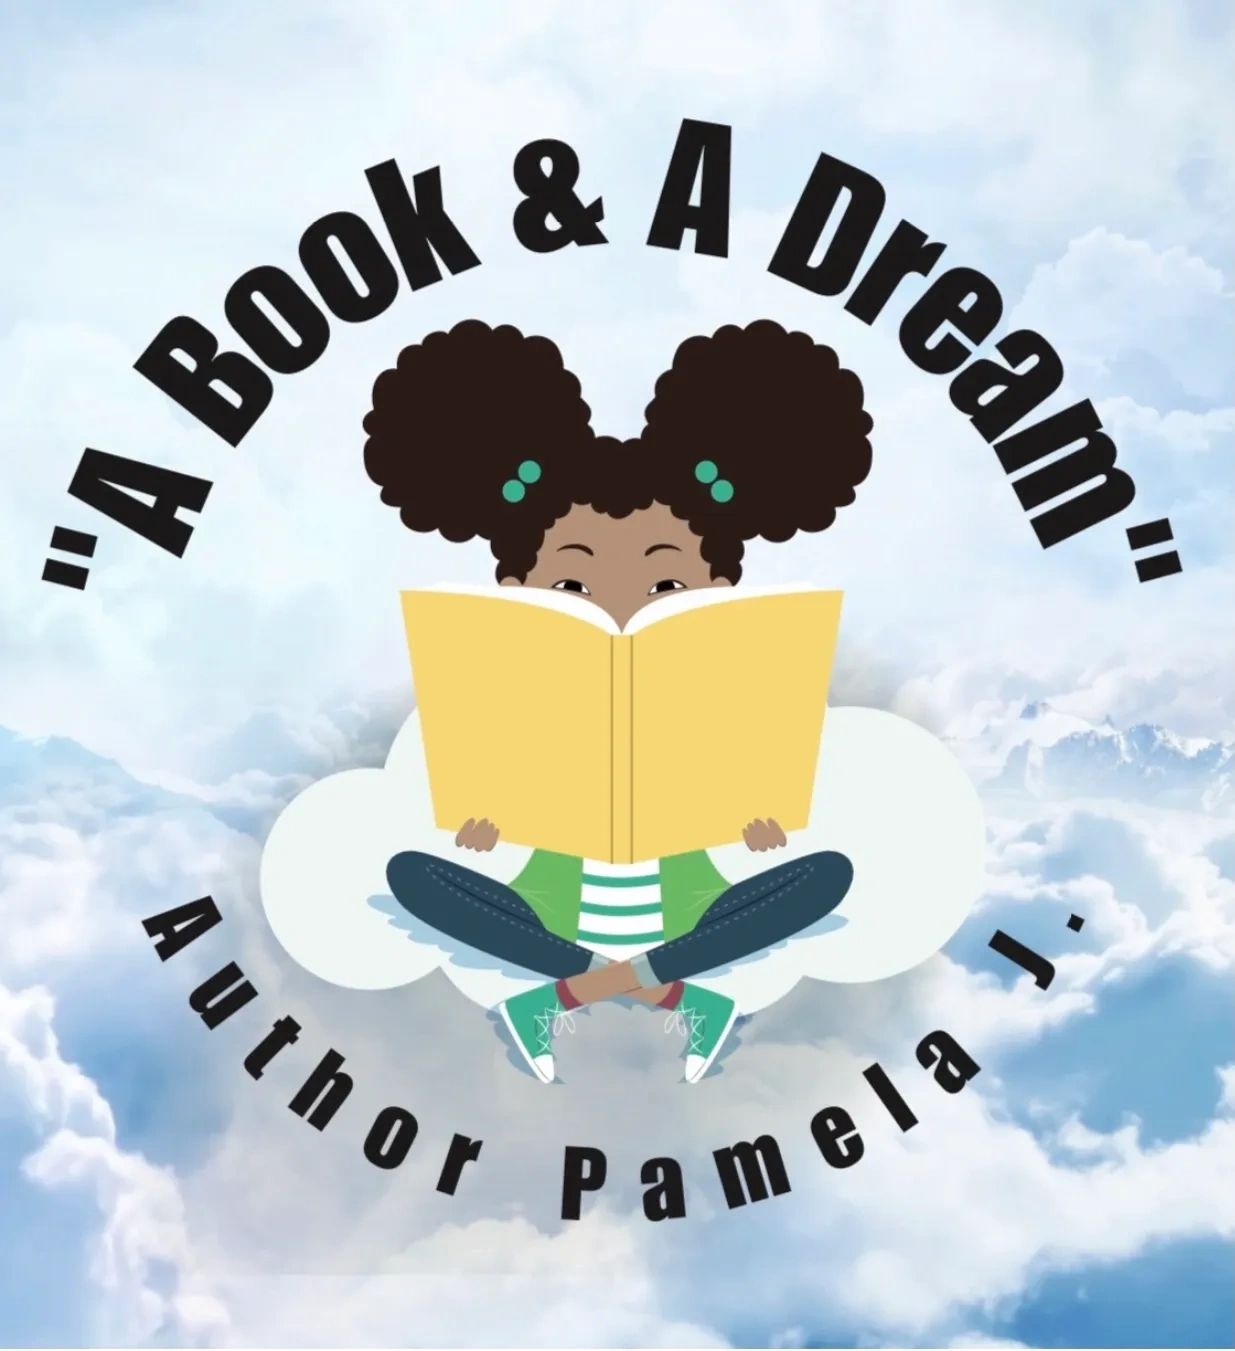 A Book & A Dream Production Home of the Brown Girl Squad!  We believe that everyone are Dreamers!  